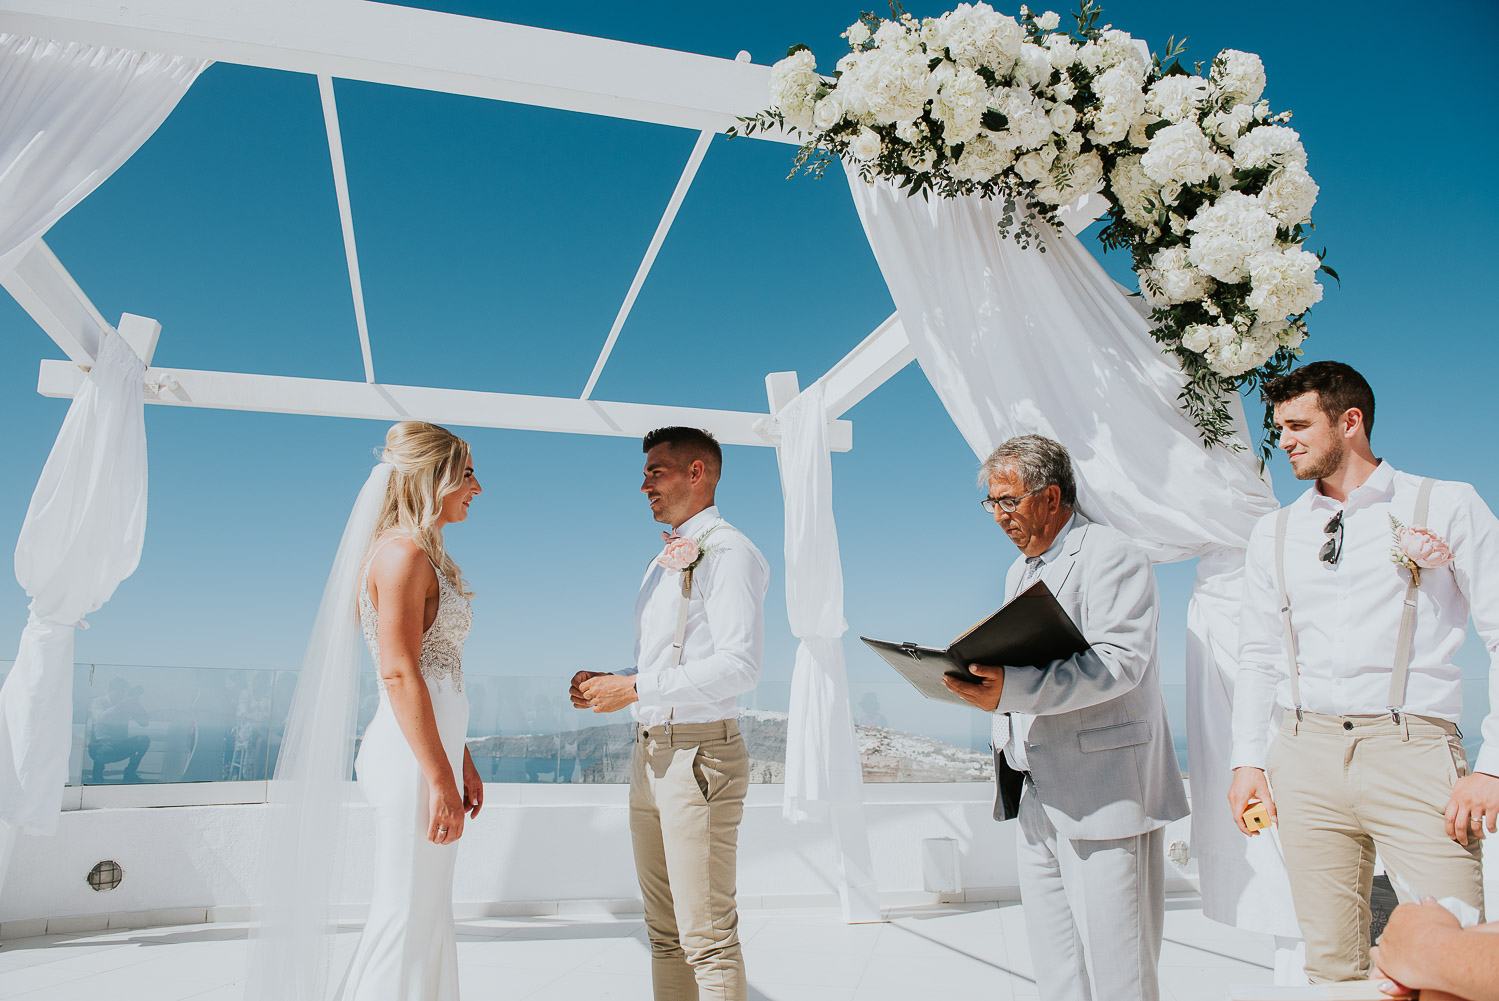 Wedding photographer Santorini: groom holding a ring looking at his bride surrounded by celebrant and the best man by Ben and Vesna.